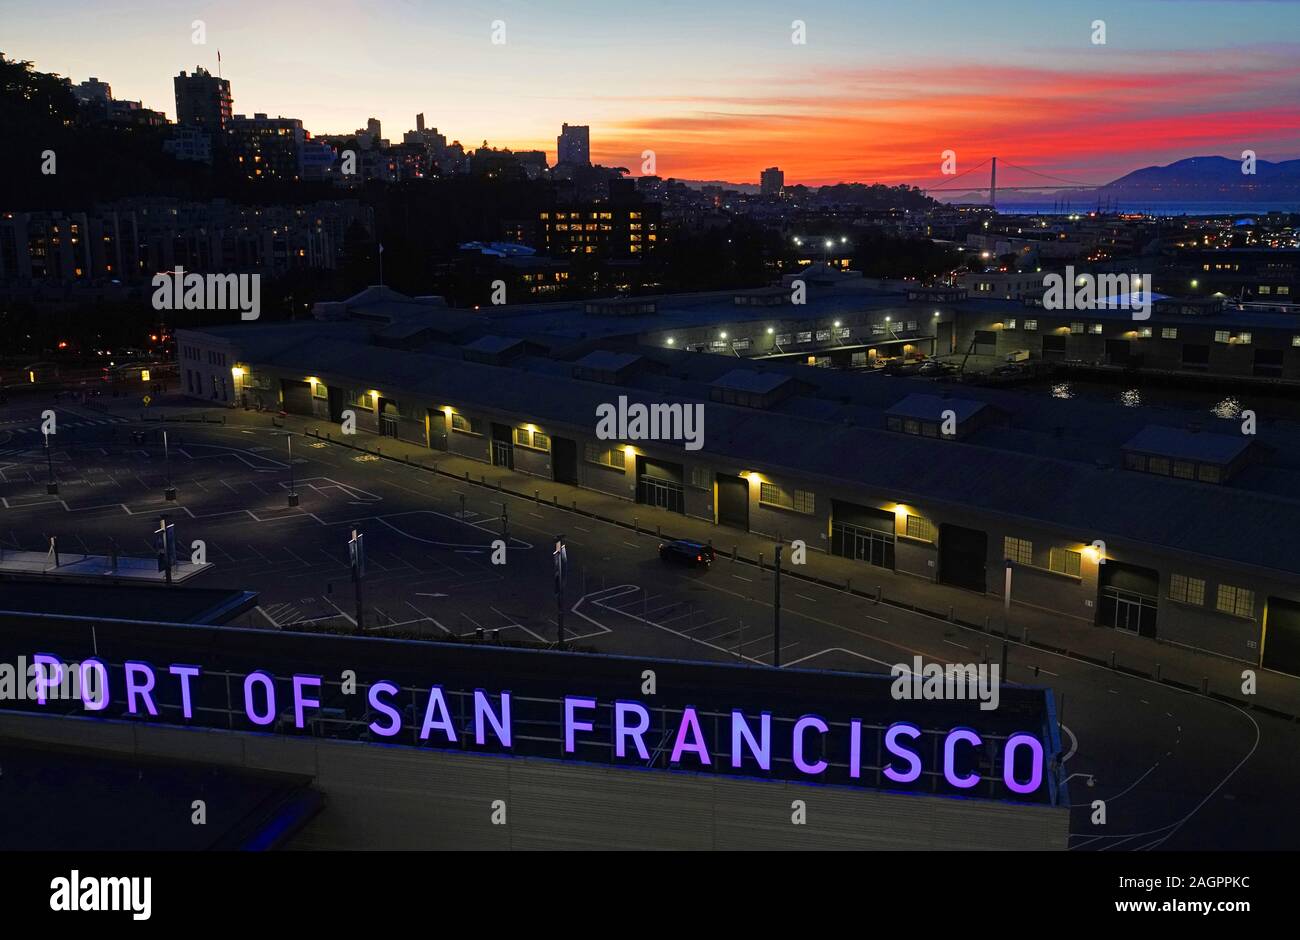 Port of San Francisco sign with Golden Gate Bridge in distance at dusk. Stock Photo